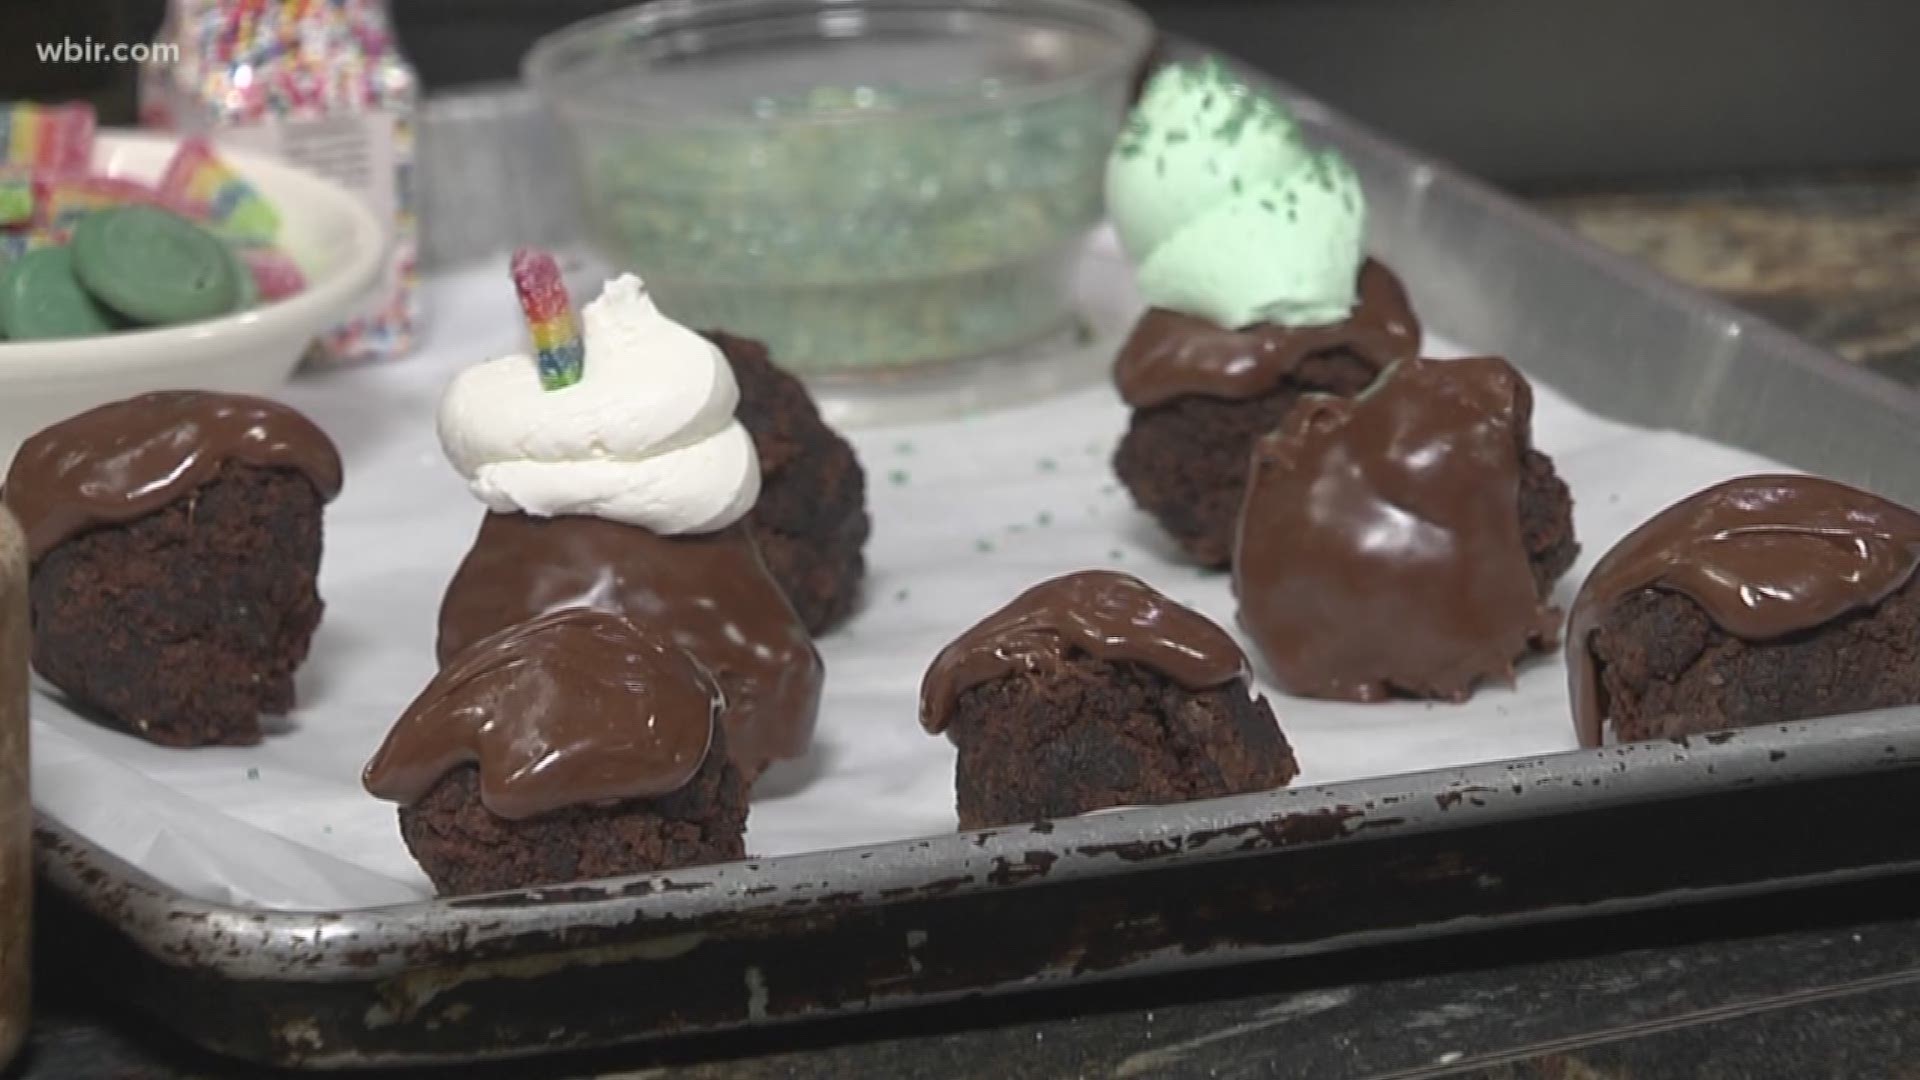 St. Patrick's Day is this Sunday and Kim Wilcox with It's All So Yummy Cafe is here to help get in the holiday spirit... with a little of the Irish and chocolate.